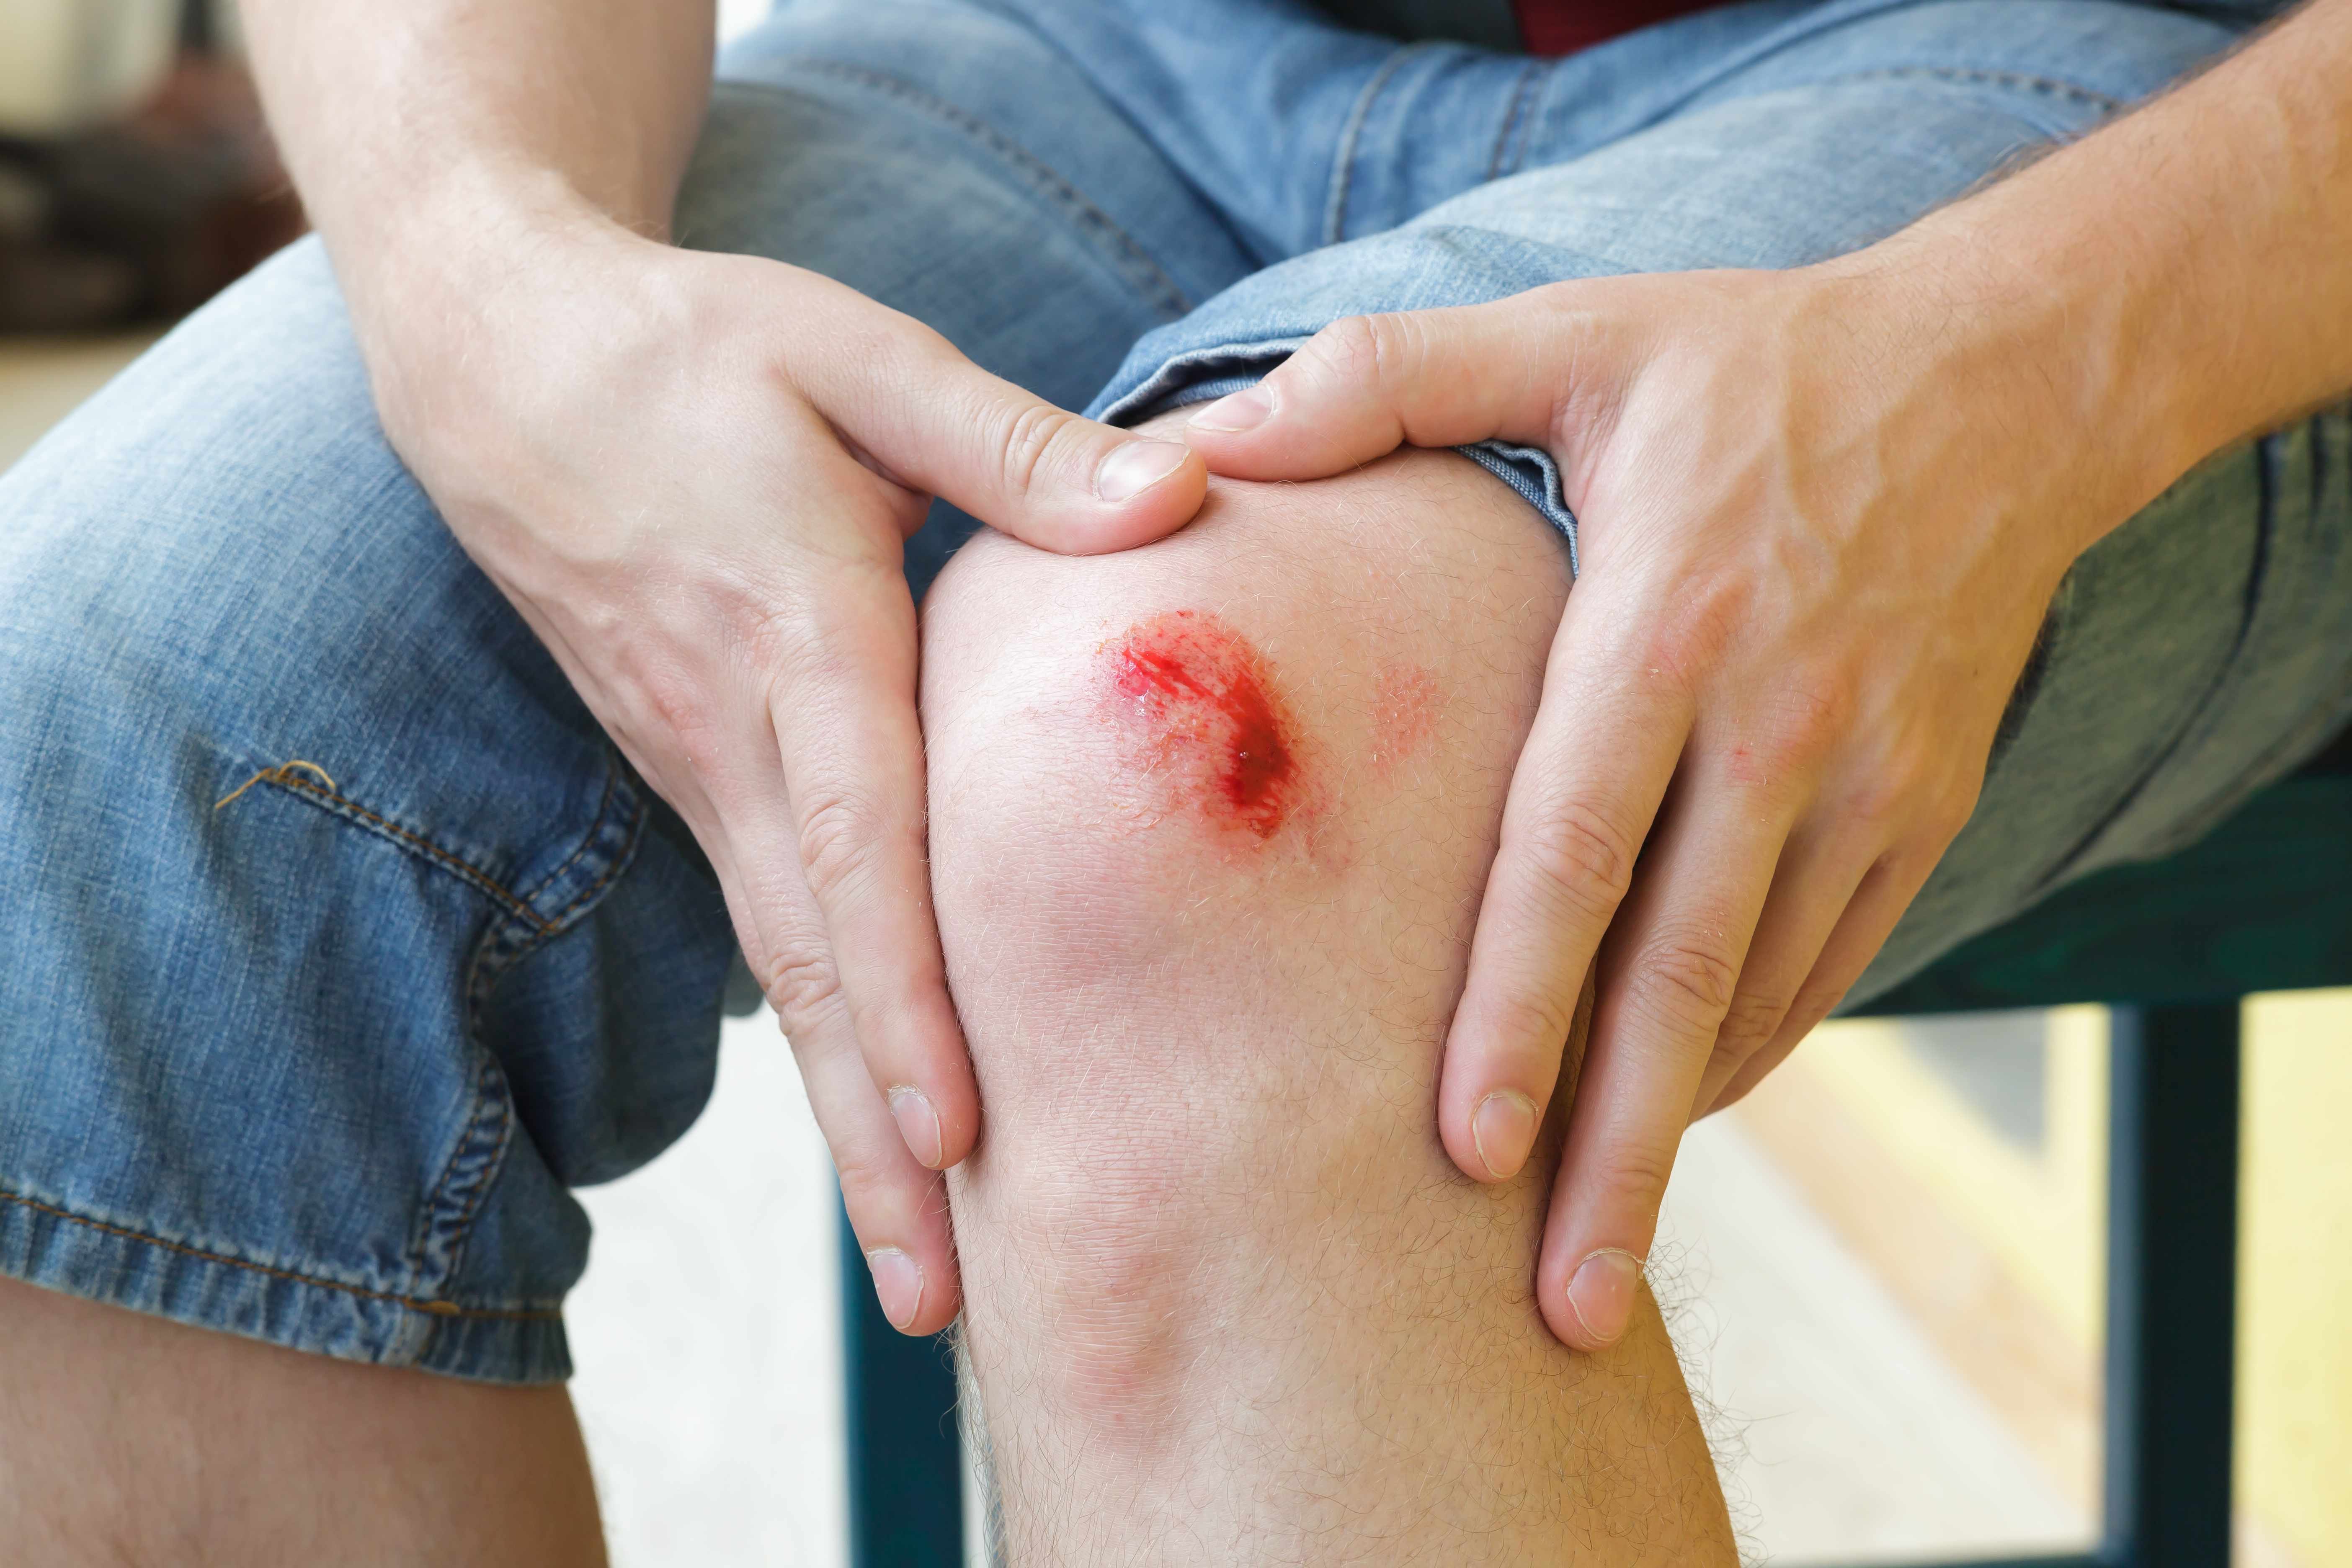 a person holding his or her knee that has been scraped and is bleeding